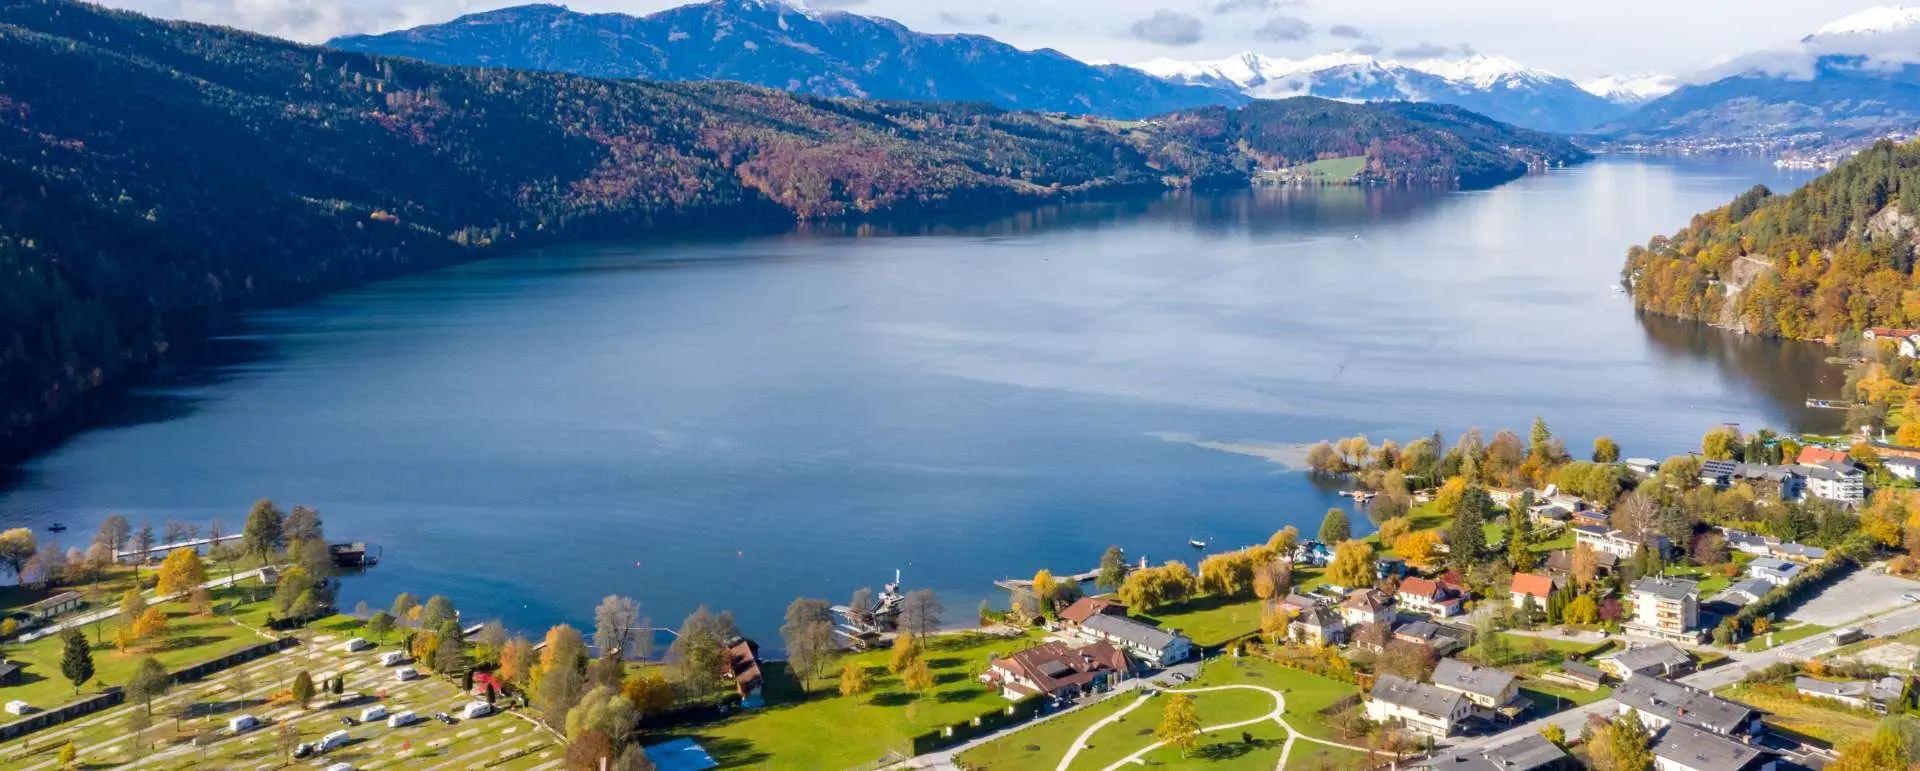 Millstätter See - the destination for company trips